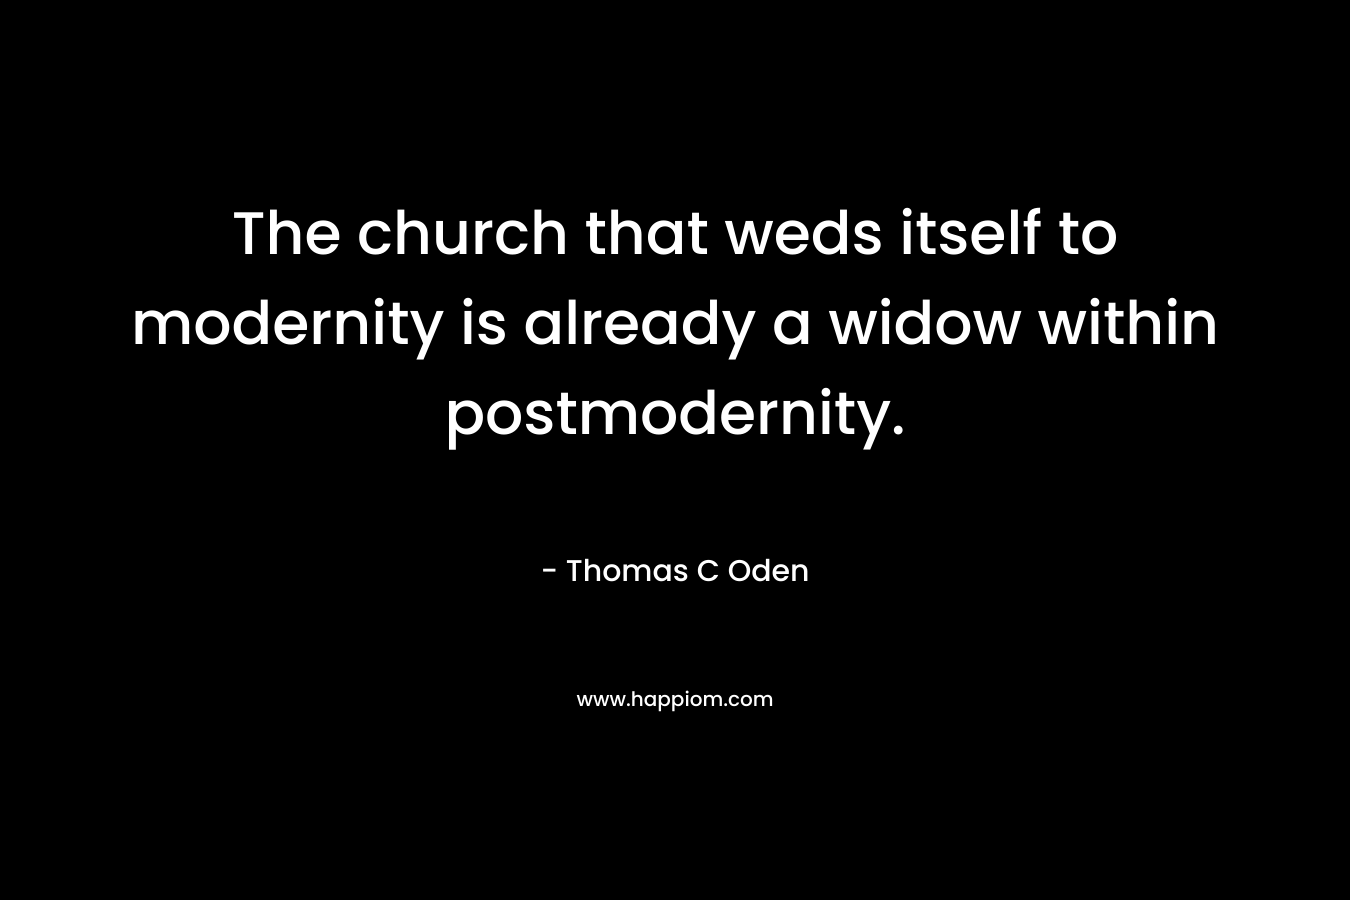 The church that weds itself to modernity is already a widow within postmodernity. – Thomas C Oden